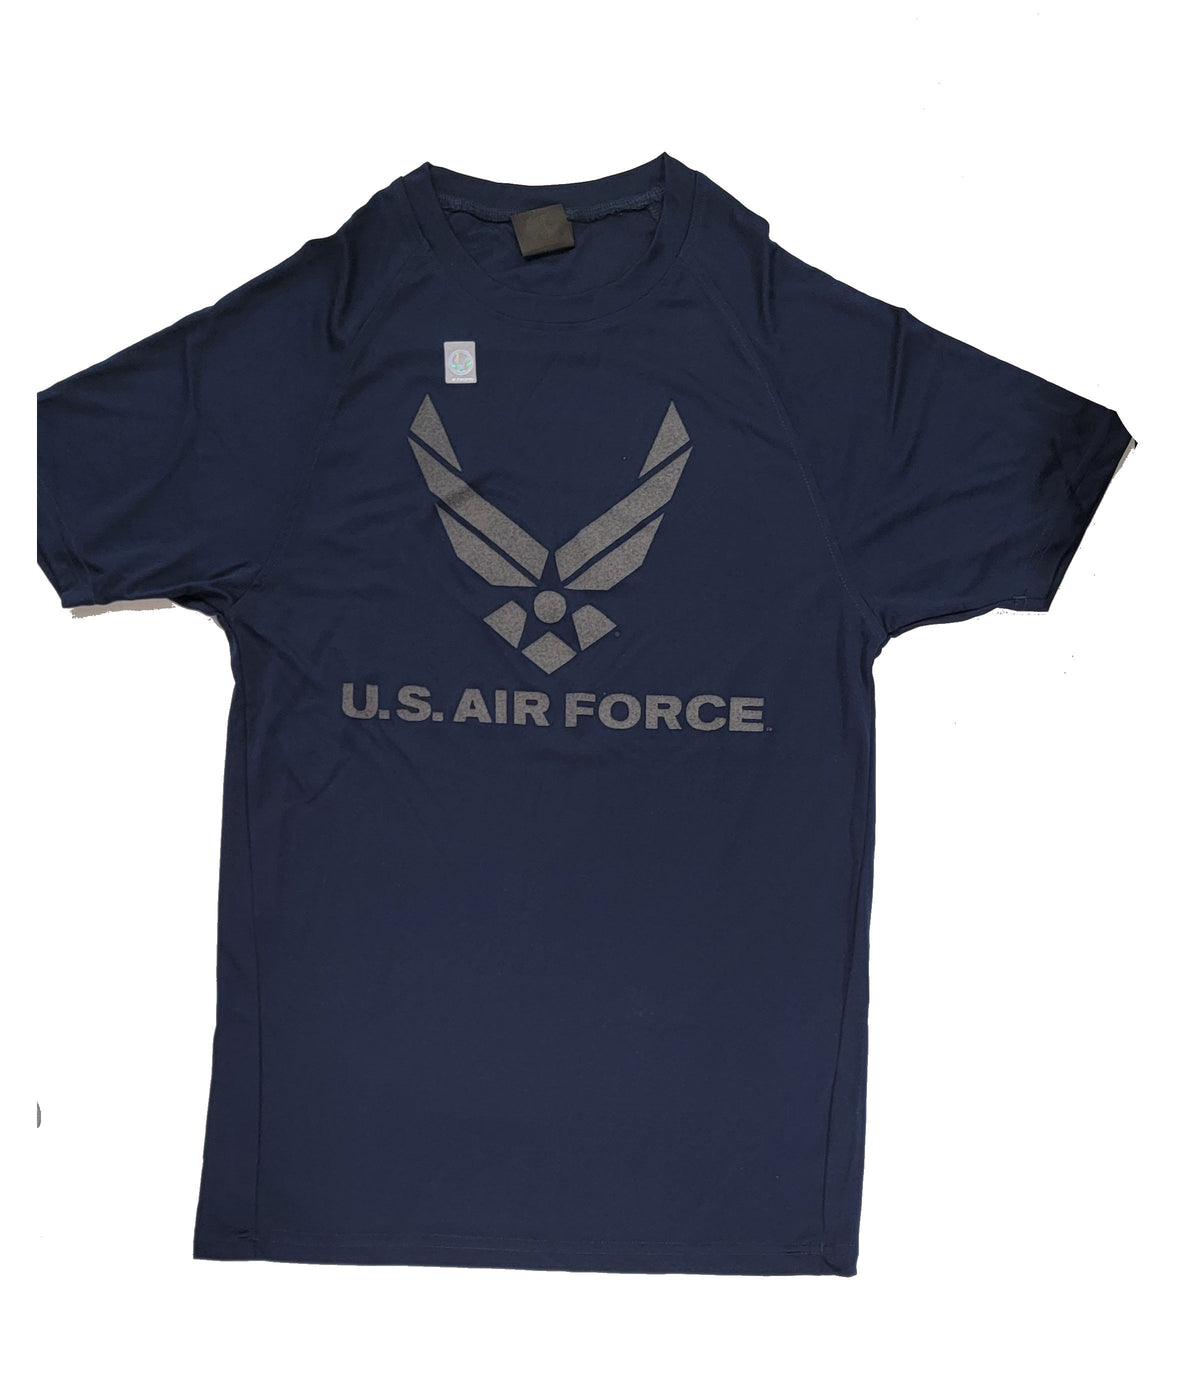 CLEARANCE - Air Force Reflective Logo Performance T-Shirt - NAVY BLUE